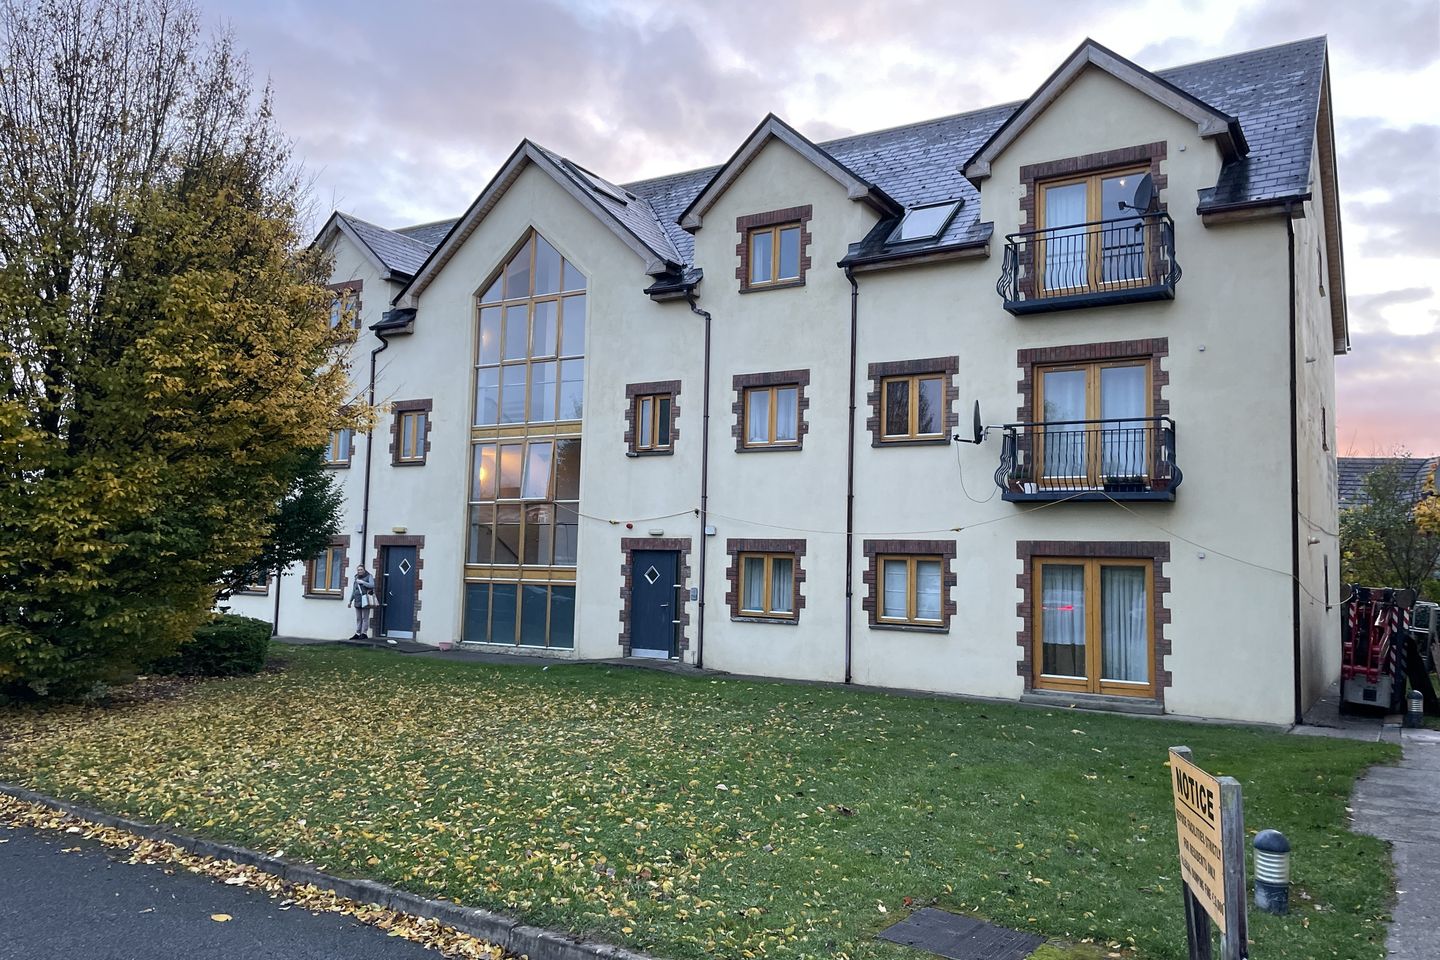 Apartment 10, Block A, The Beeches, Naas, Co. Kildare, W91X582